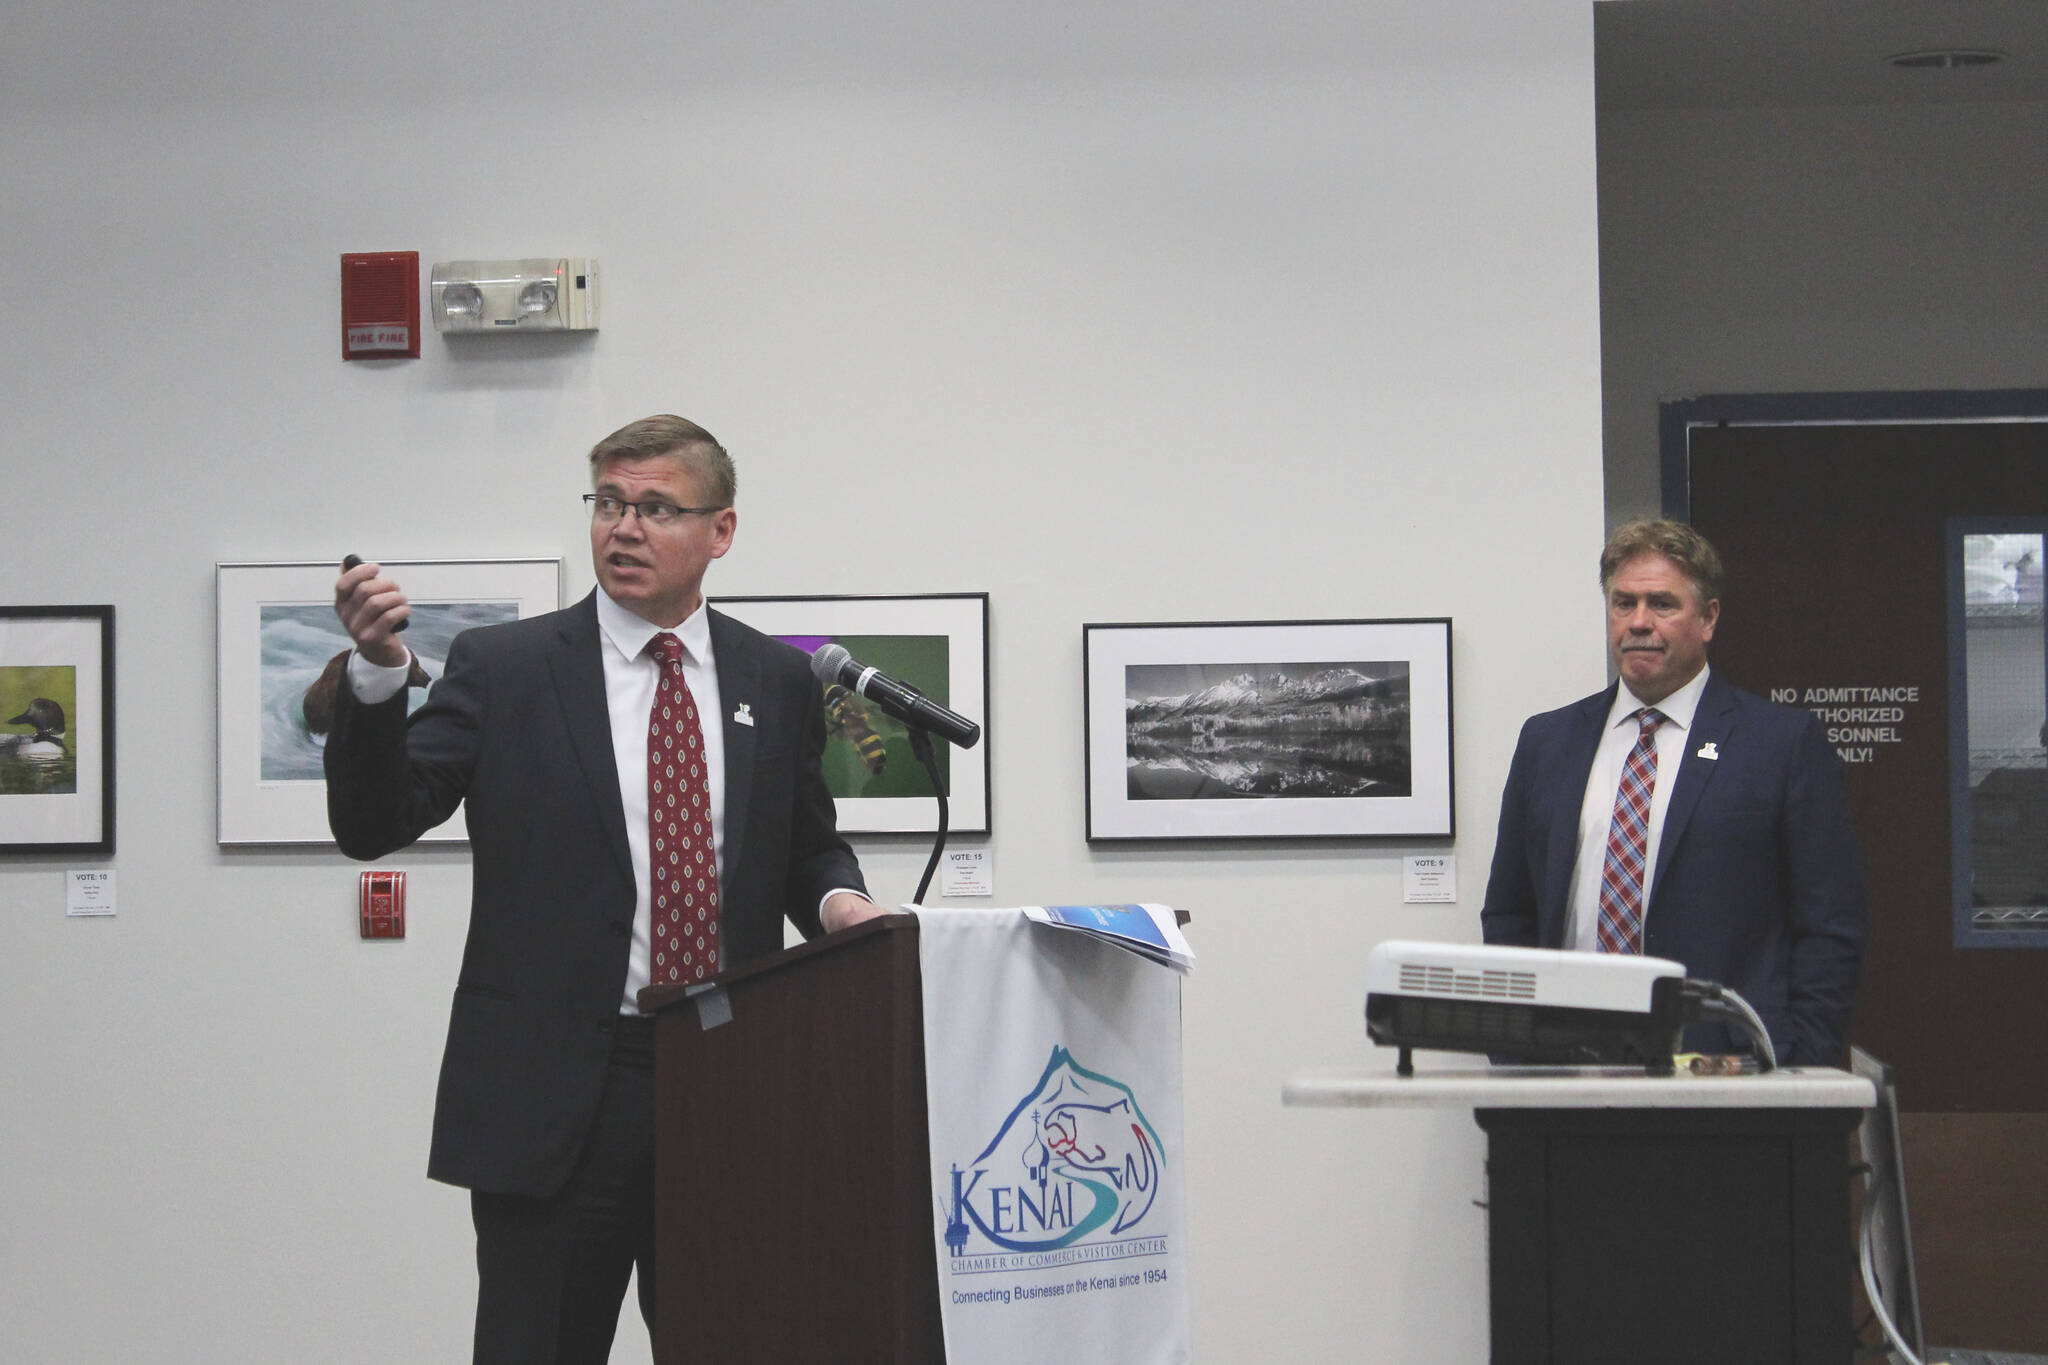 Kenai City Manager Paul Ostrander, left, speaks during a “State of the City” address while Kenai Mayor Brian Gabriel looks on at the Kenai Chamber of Commerce and Visitor Center on Wednesday, May 4, 2022 in Kenai, Alaska. (Ashlyn O’Hara/Peninsula Clarion)